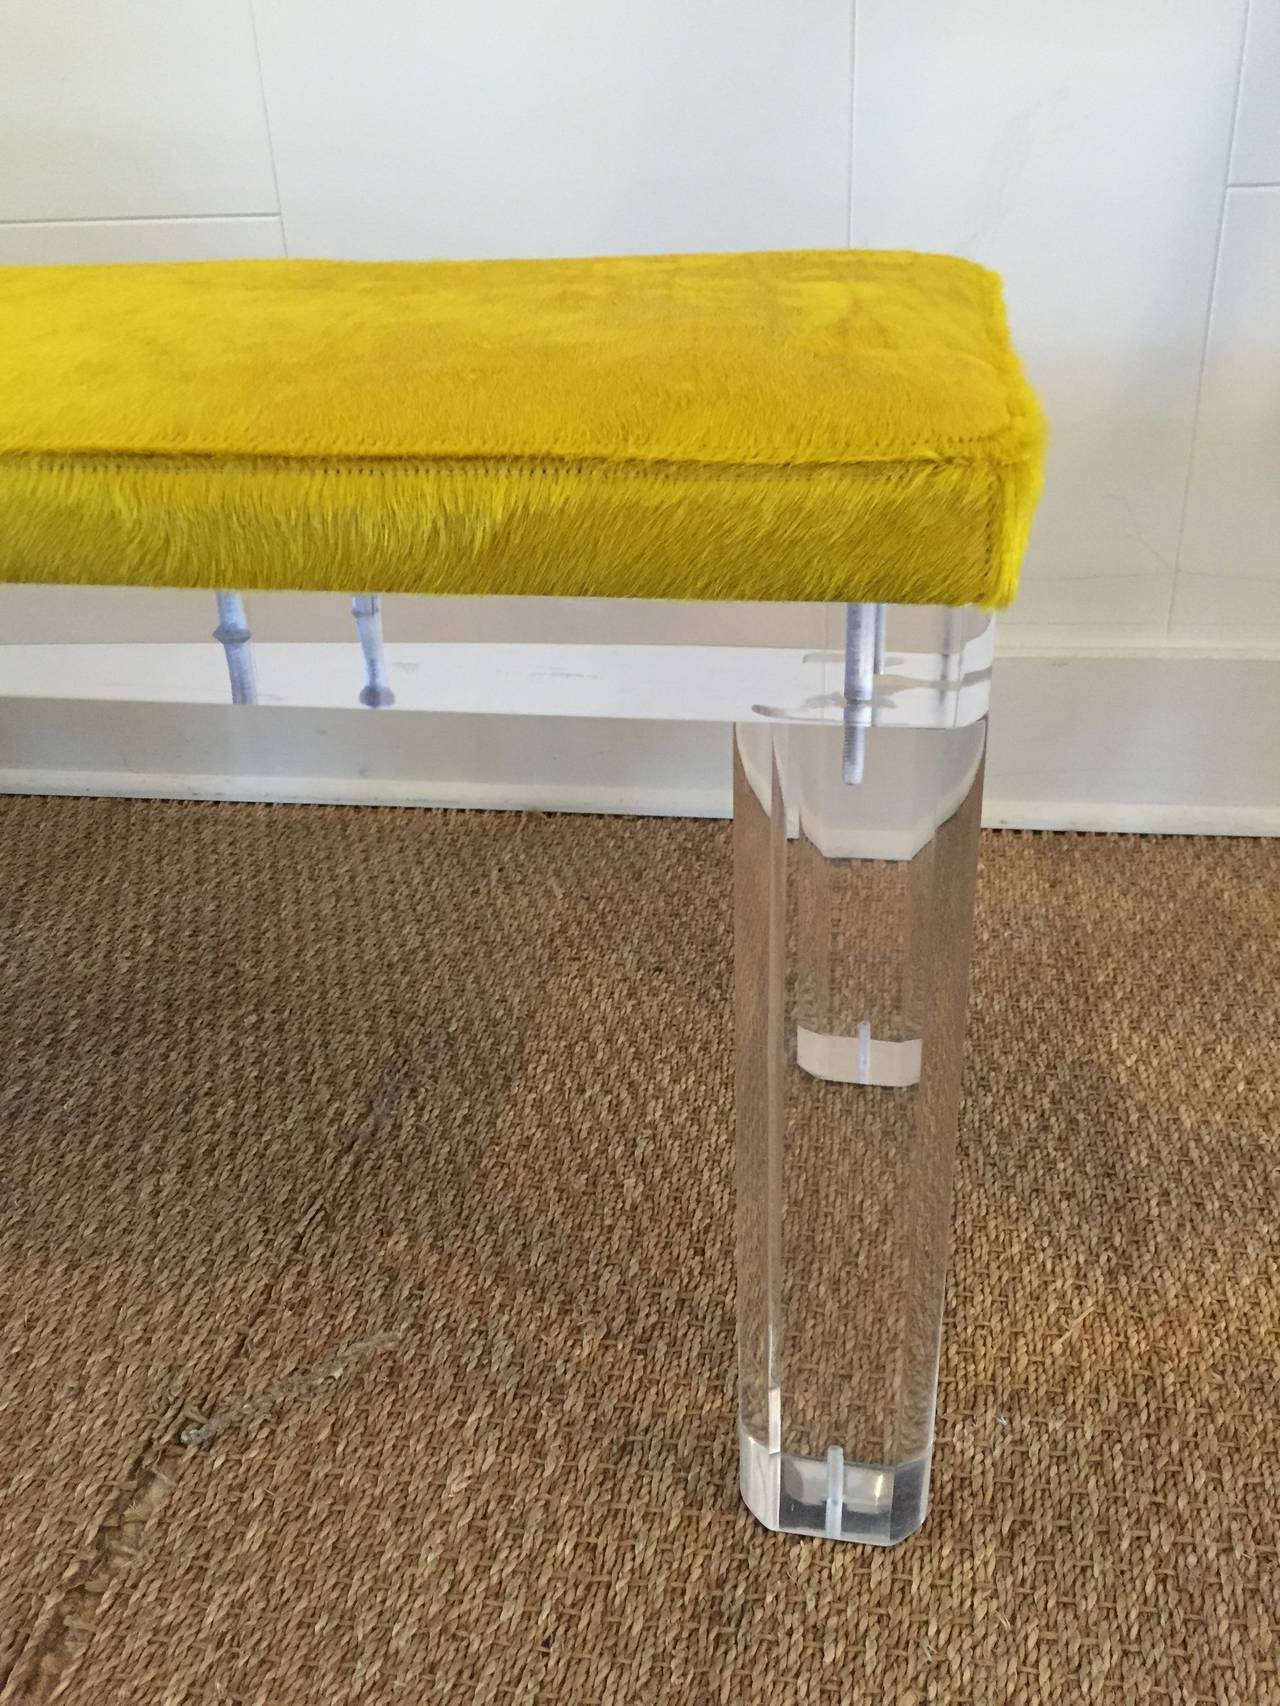 American Thick Lucite Bench with Vibrant Cowhide Seat